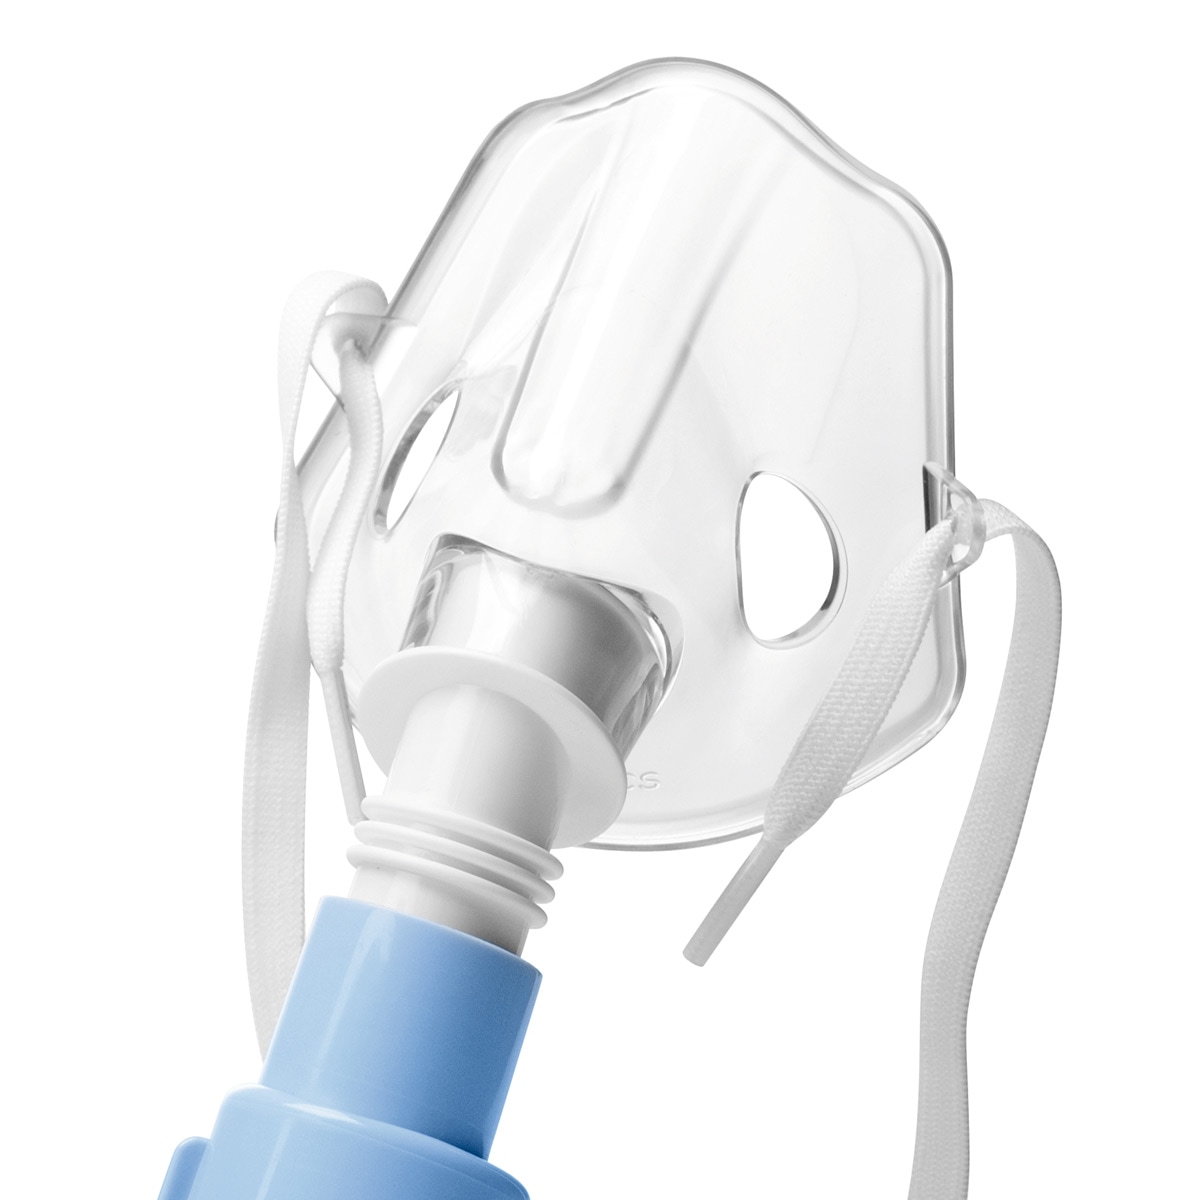 SideStream Reusable Pediatric Aerosol Mask for Nebulizers: Direct Home